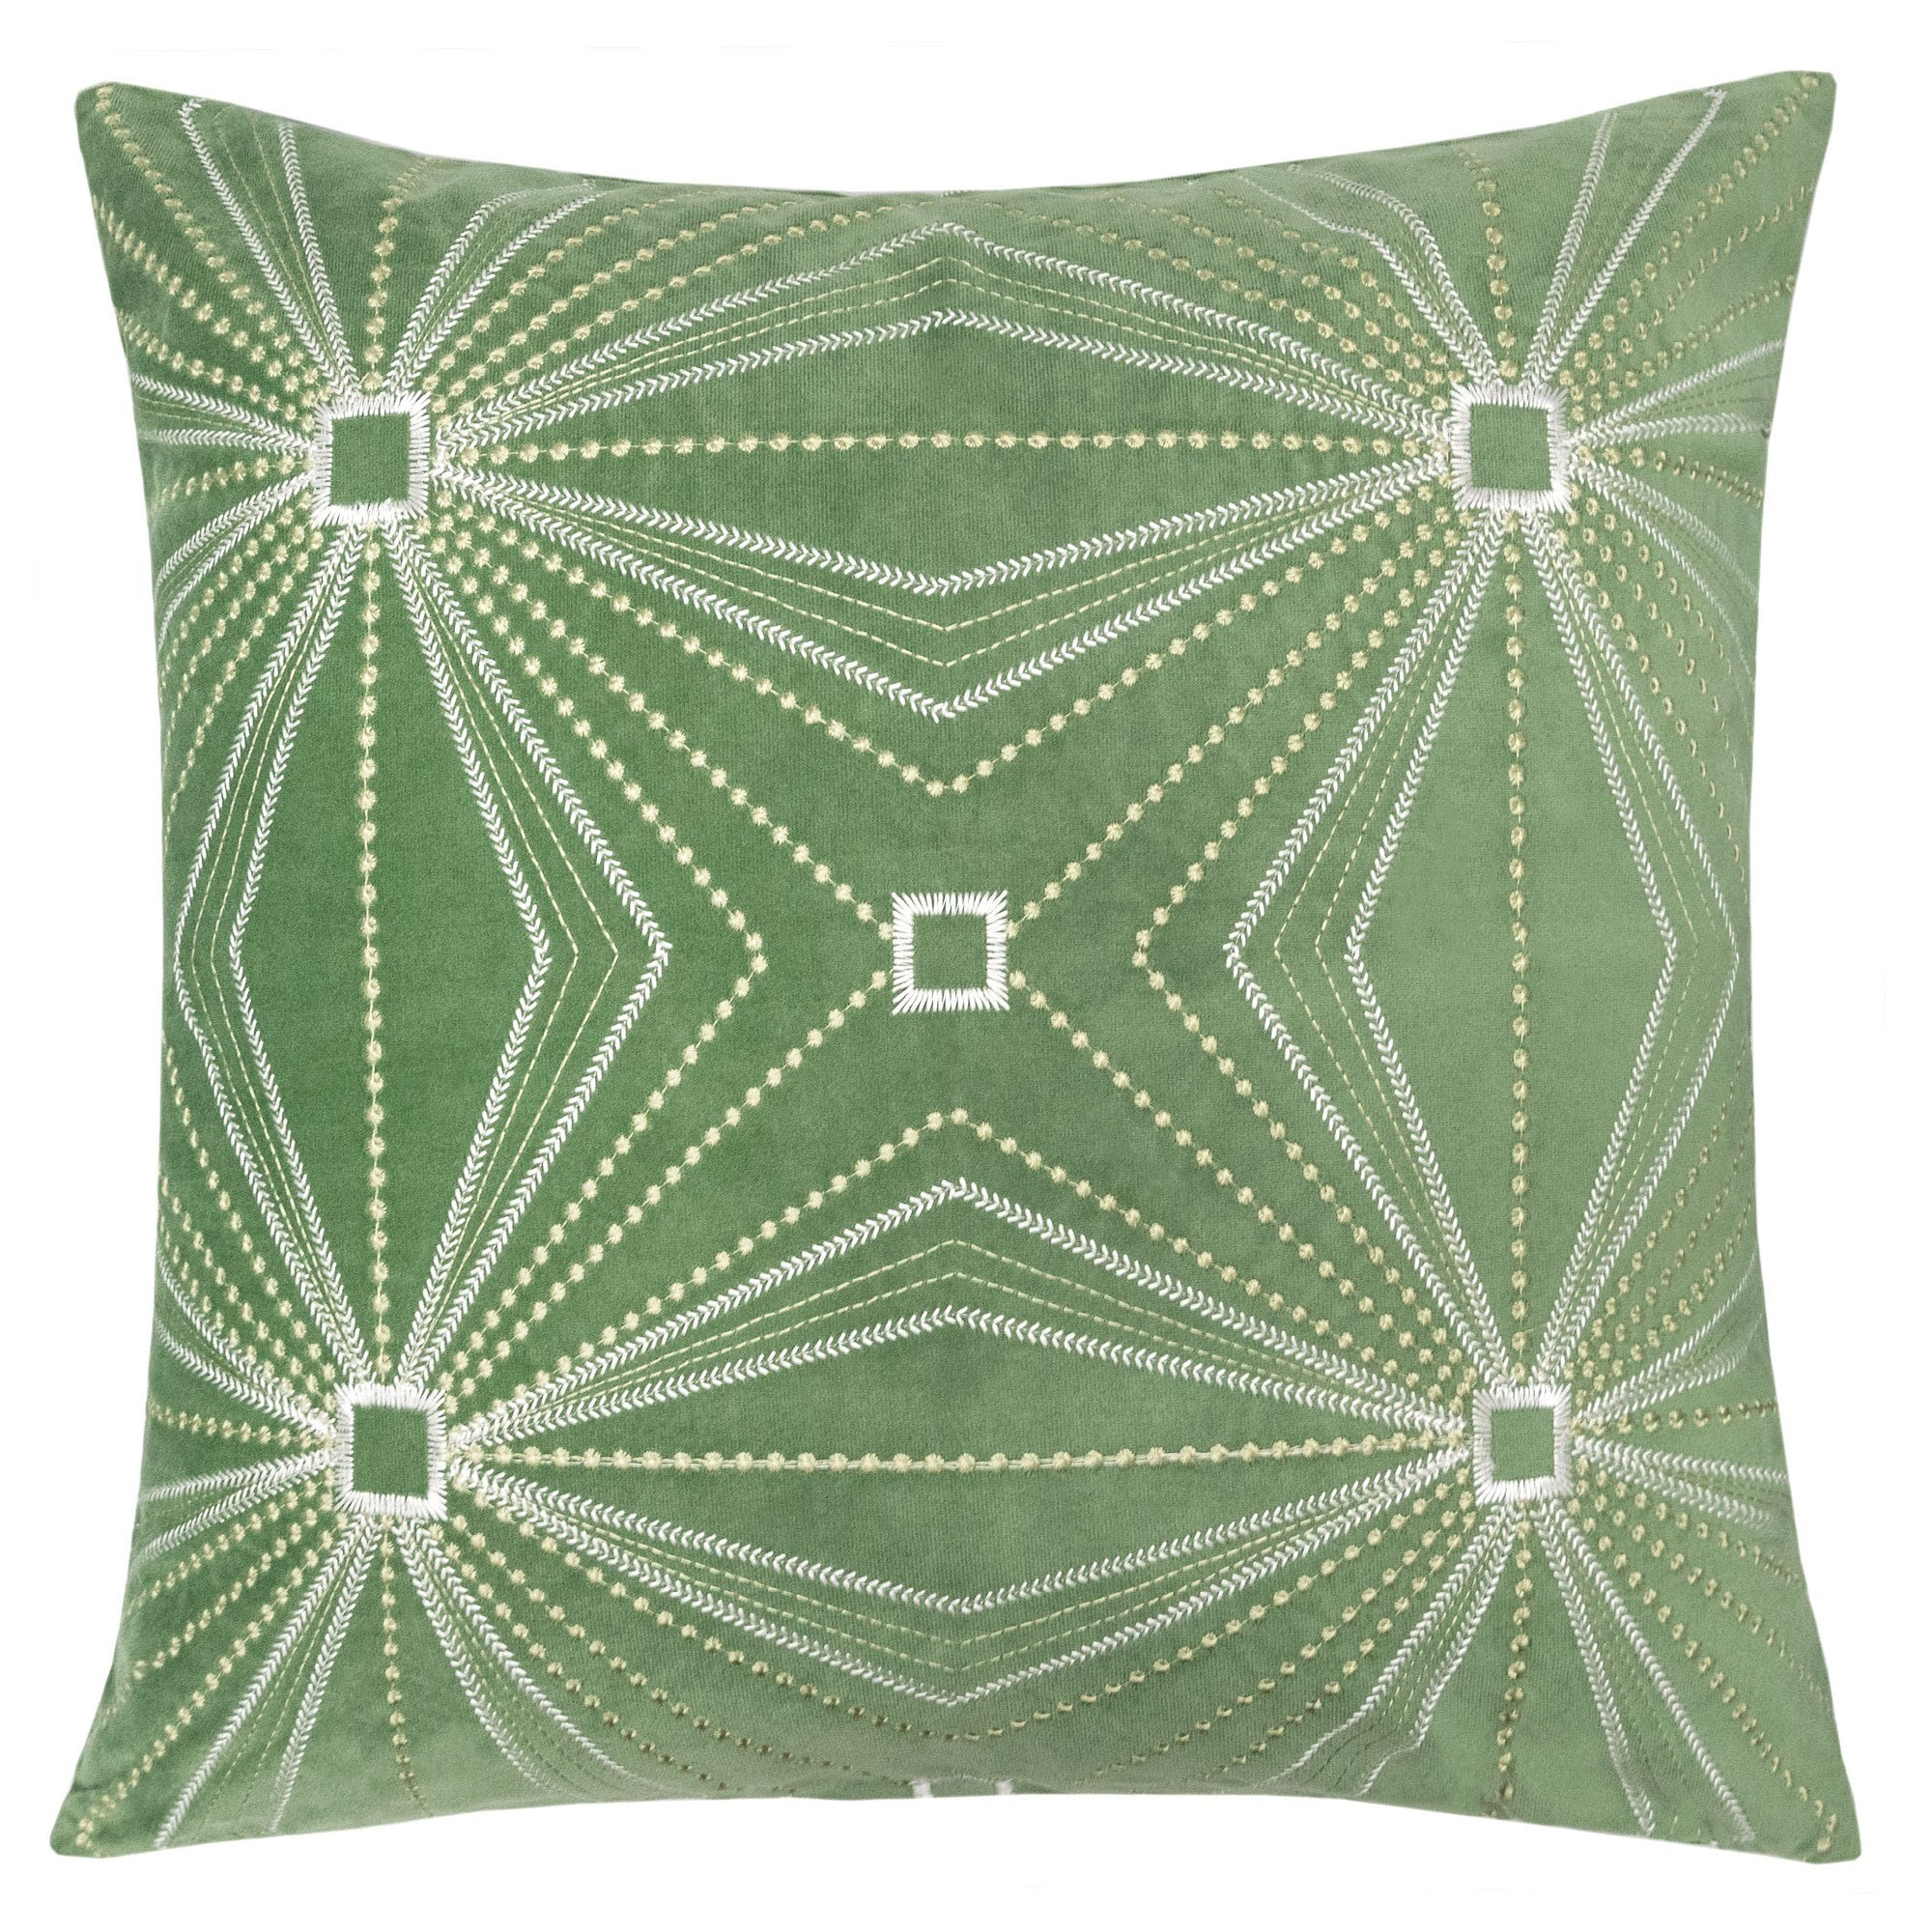 Celtic Embroidery Patterns Celtic Irish Embroidery Patterns Patterns For You